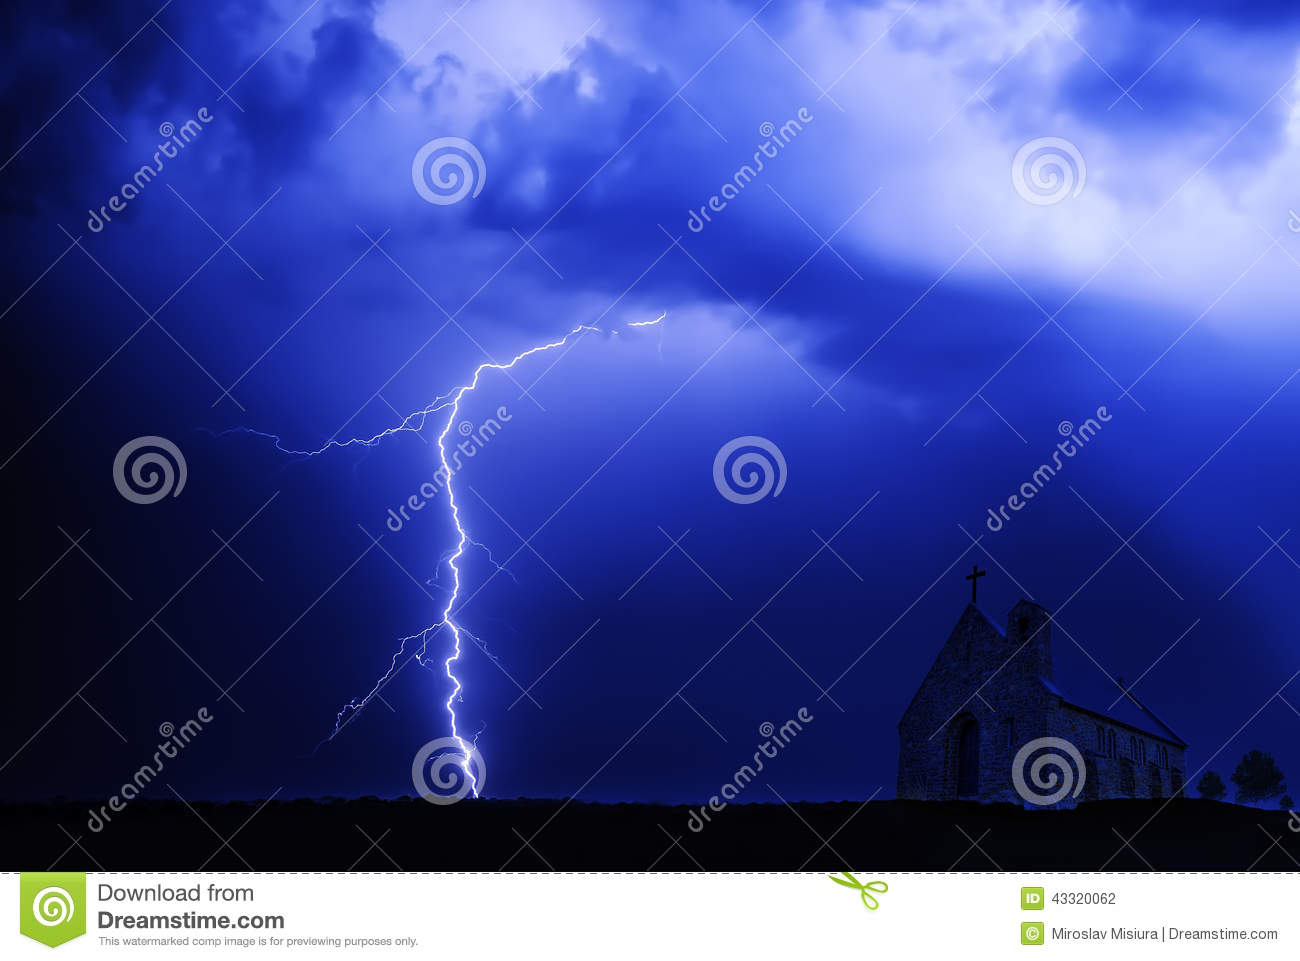 Lightning On The Sky Is Covered With Gray Clouds In Rainy Season